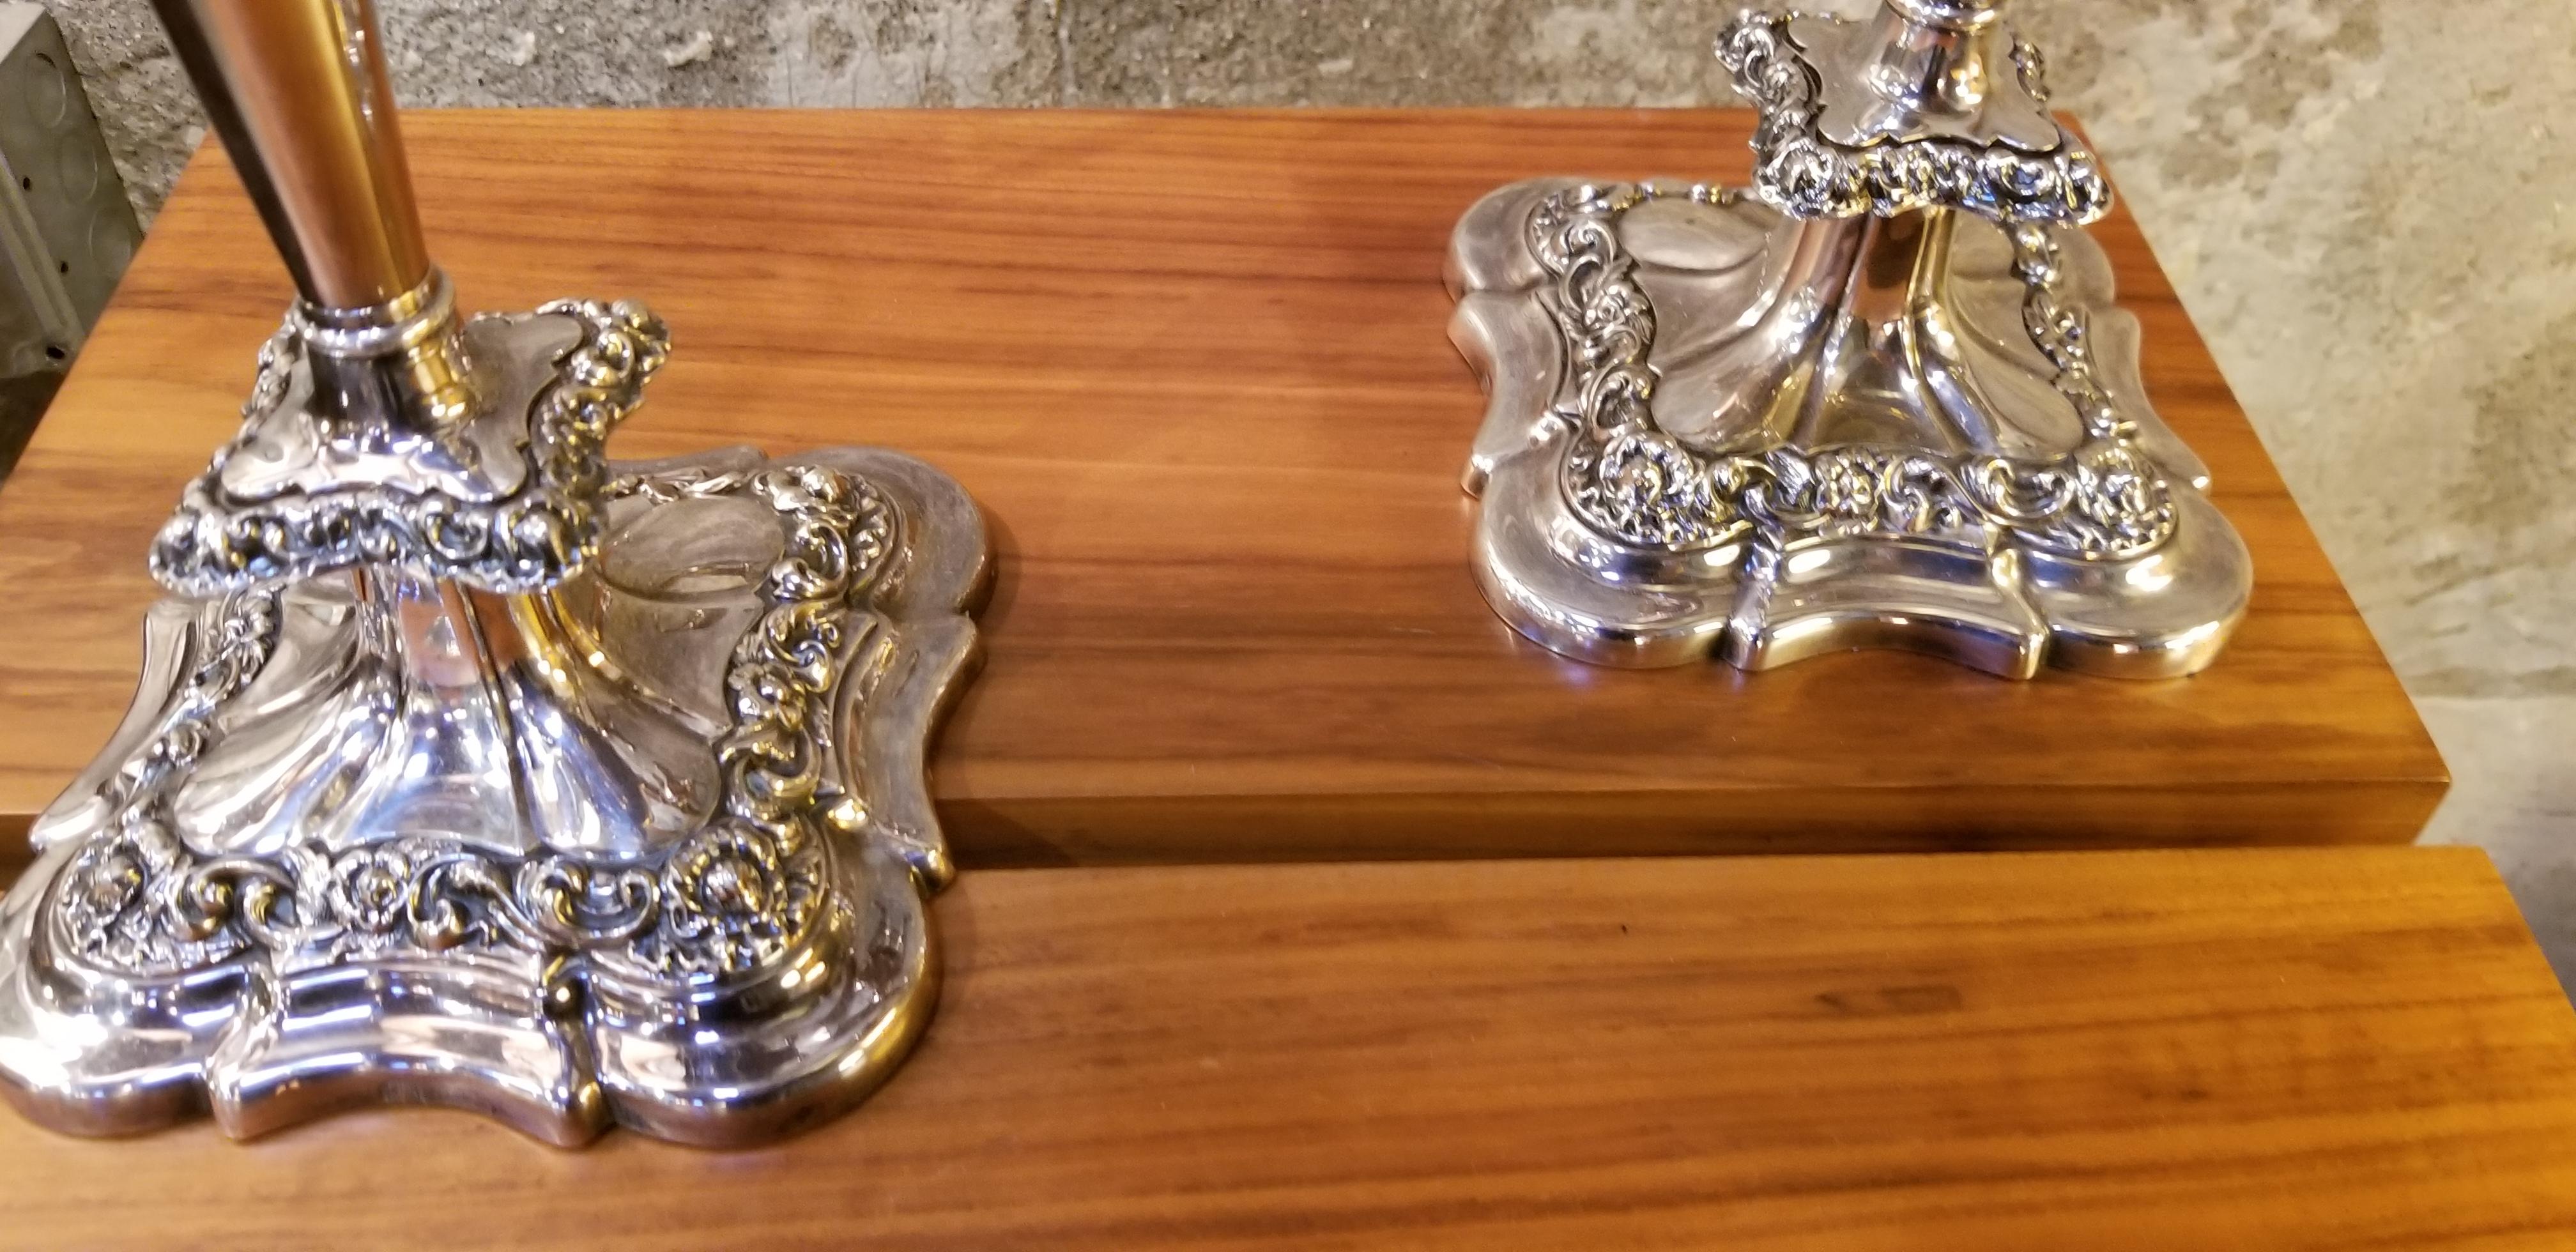 English Silver Plate Candelabras by Barker-Ellis  In Good Condition For Sale In Fulton, CA